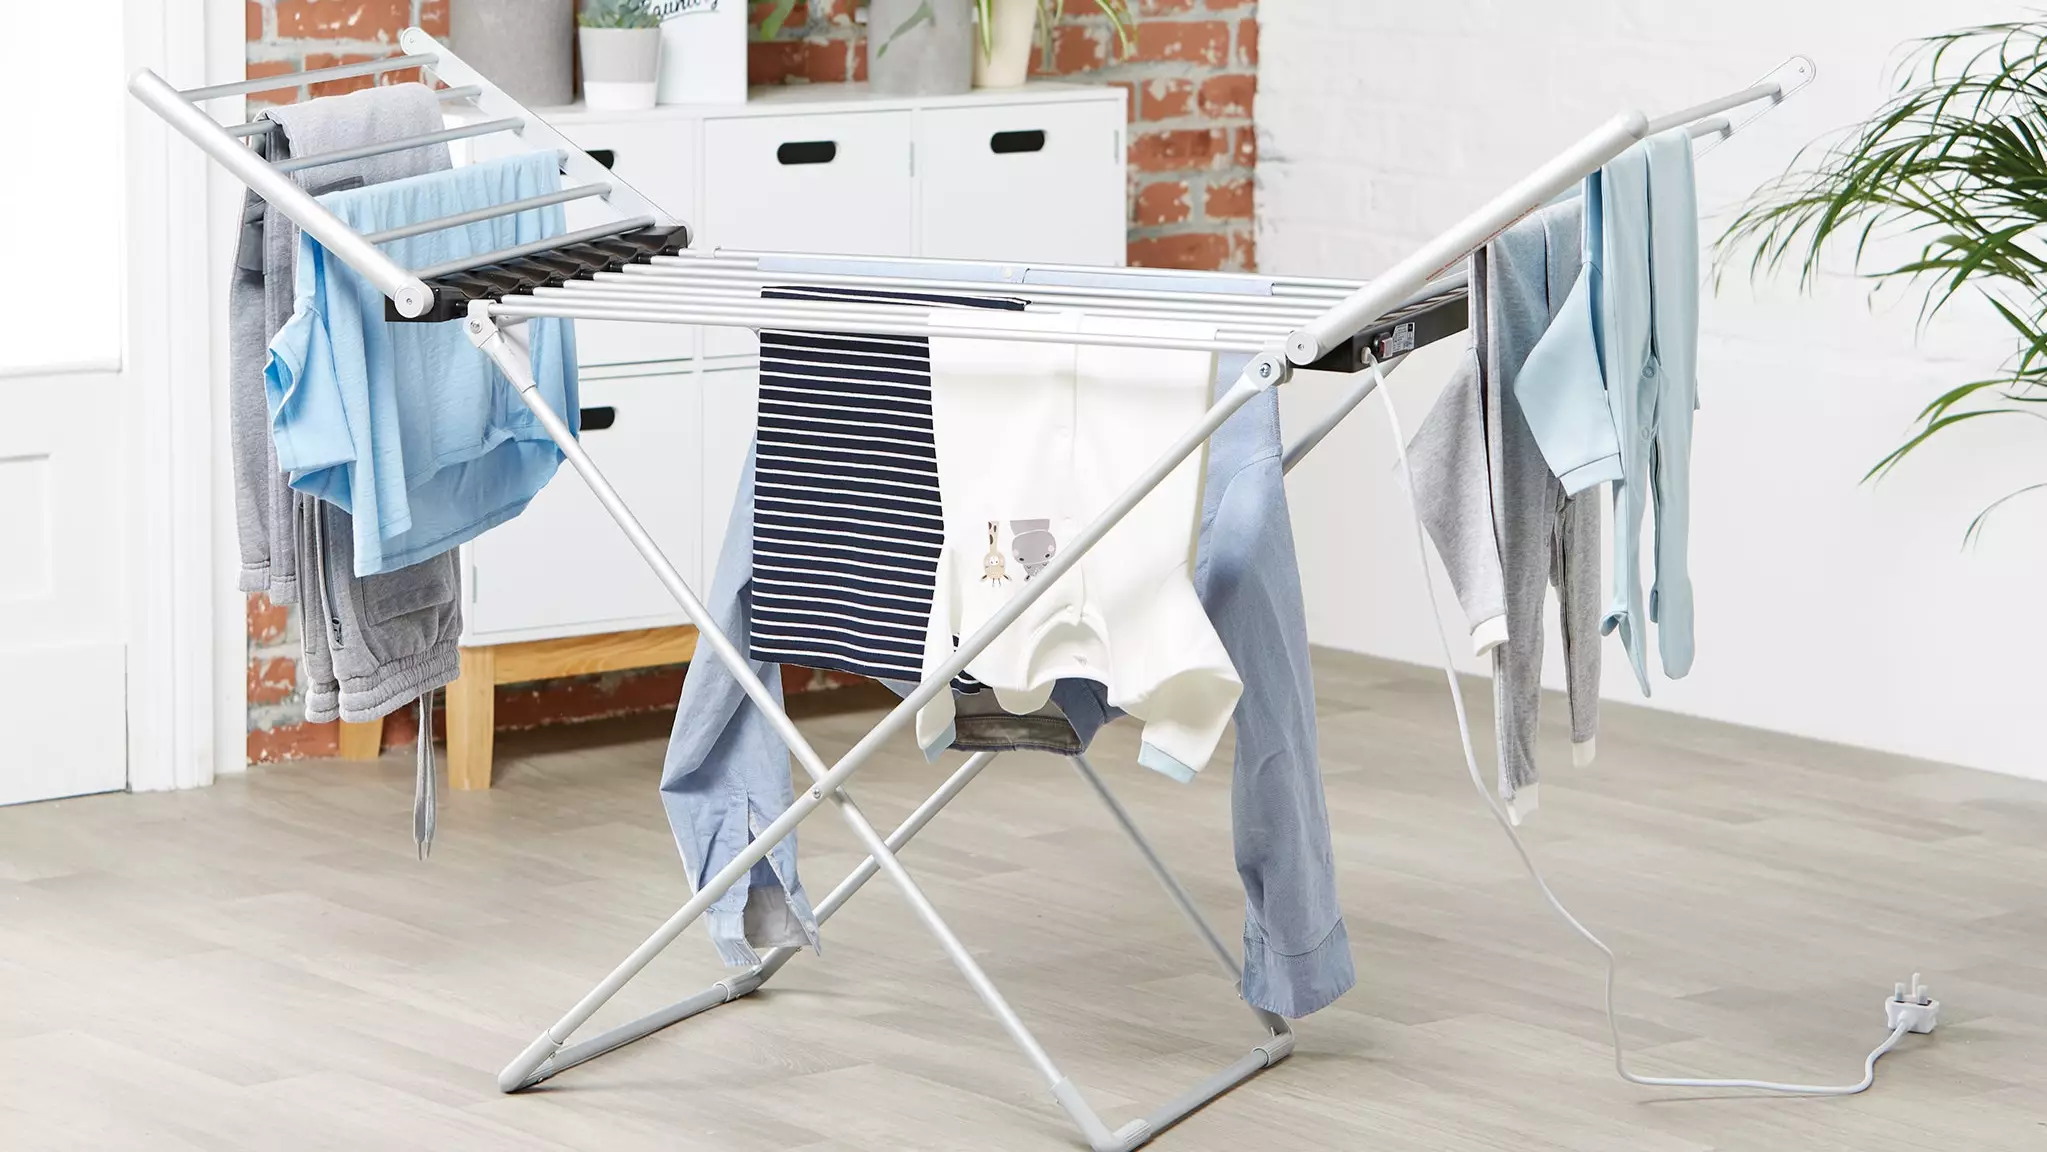 Aldi's £28.99 Heated Clothes Airer Is Back - And It's An Absolute Gamechanger